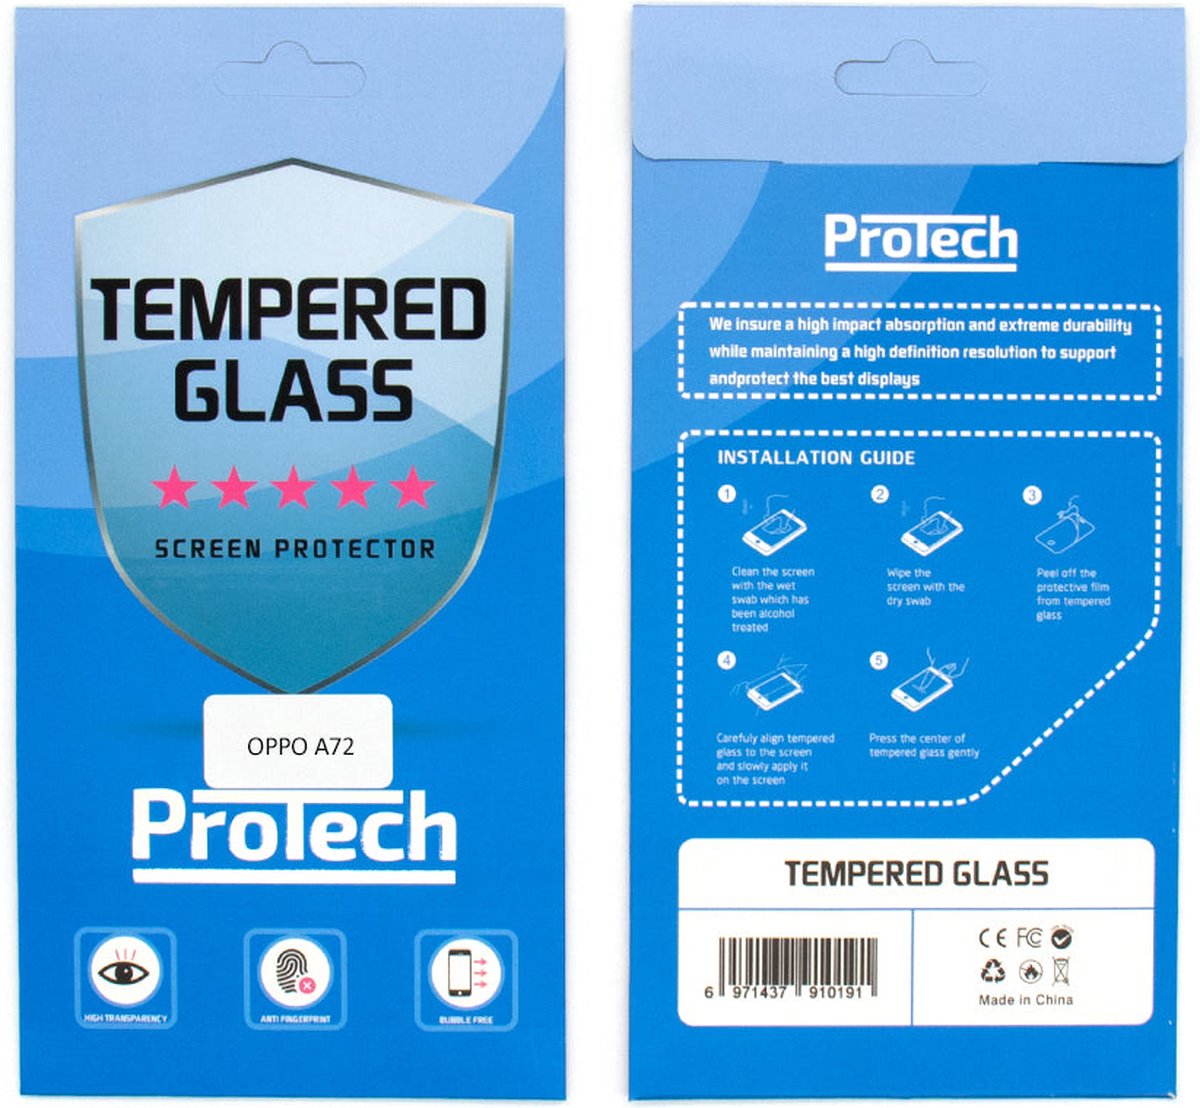 MF Oppo A72 Screenprotector - Tempered Glass - Beschermglas - Gehard Glas - Screen Protector Glas 2 stuks